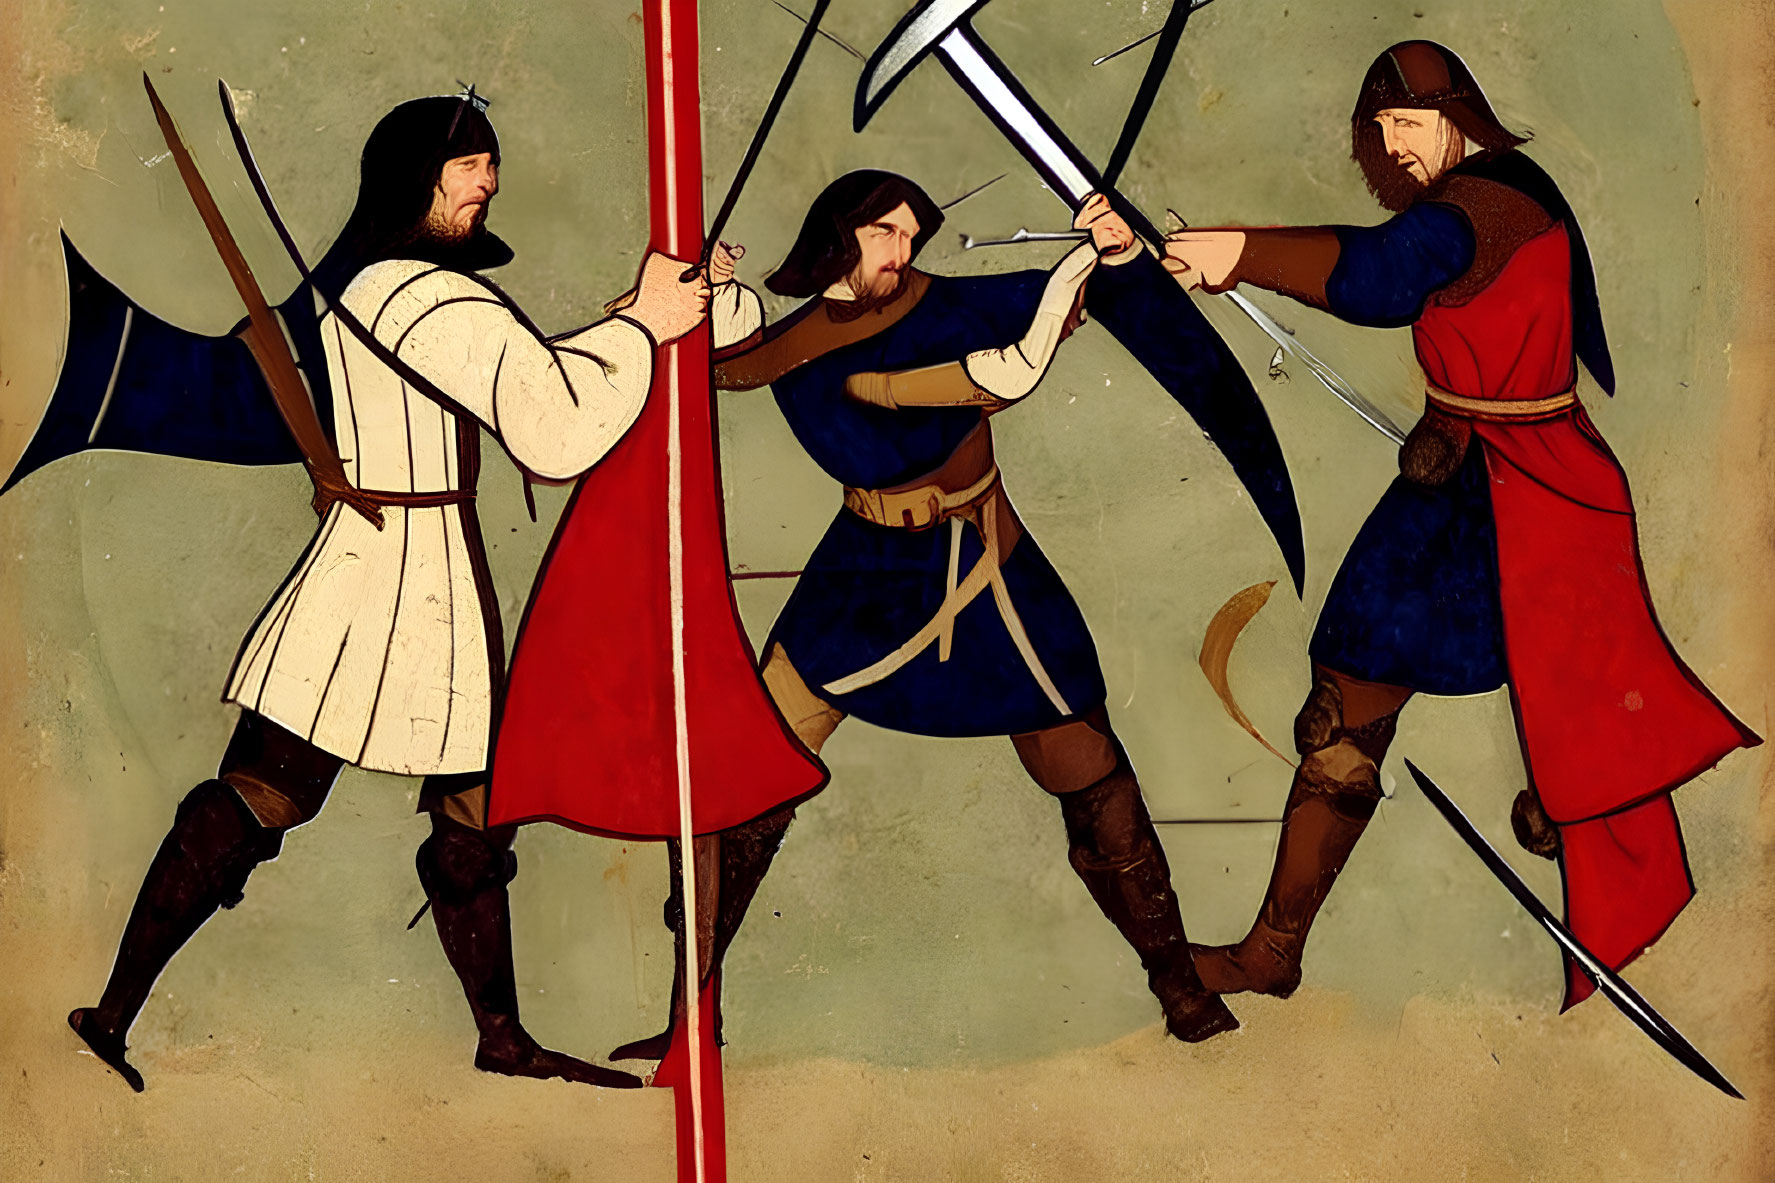 Medieval knights with swords and capes in combat stance on beige background